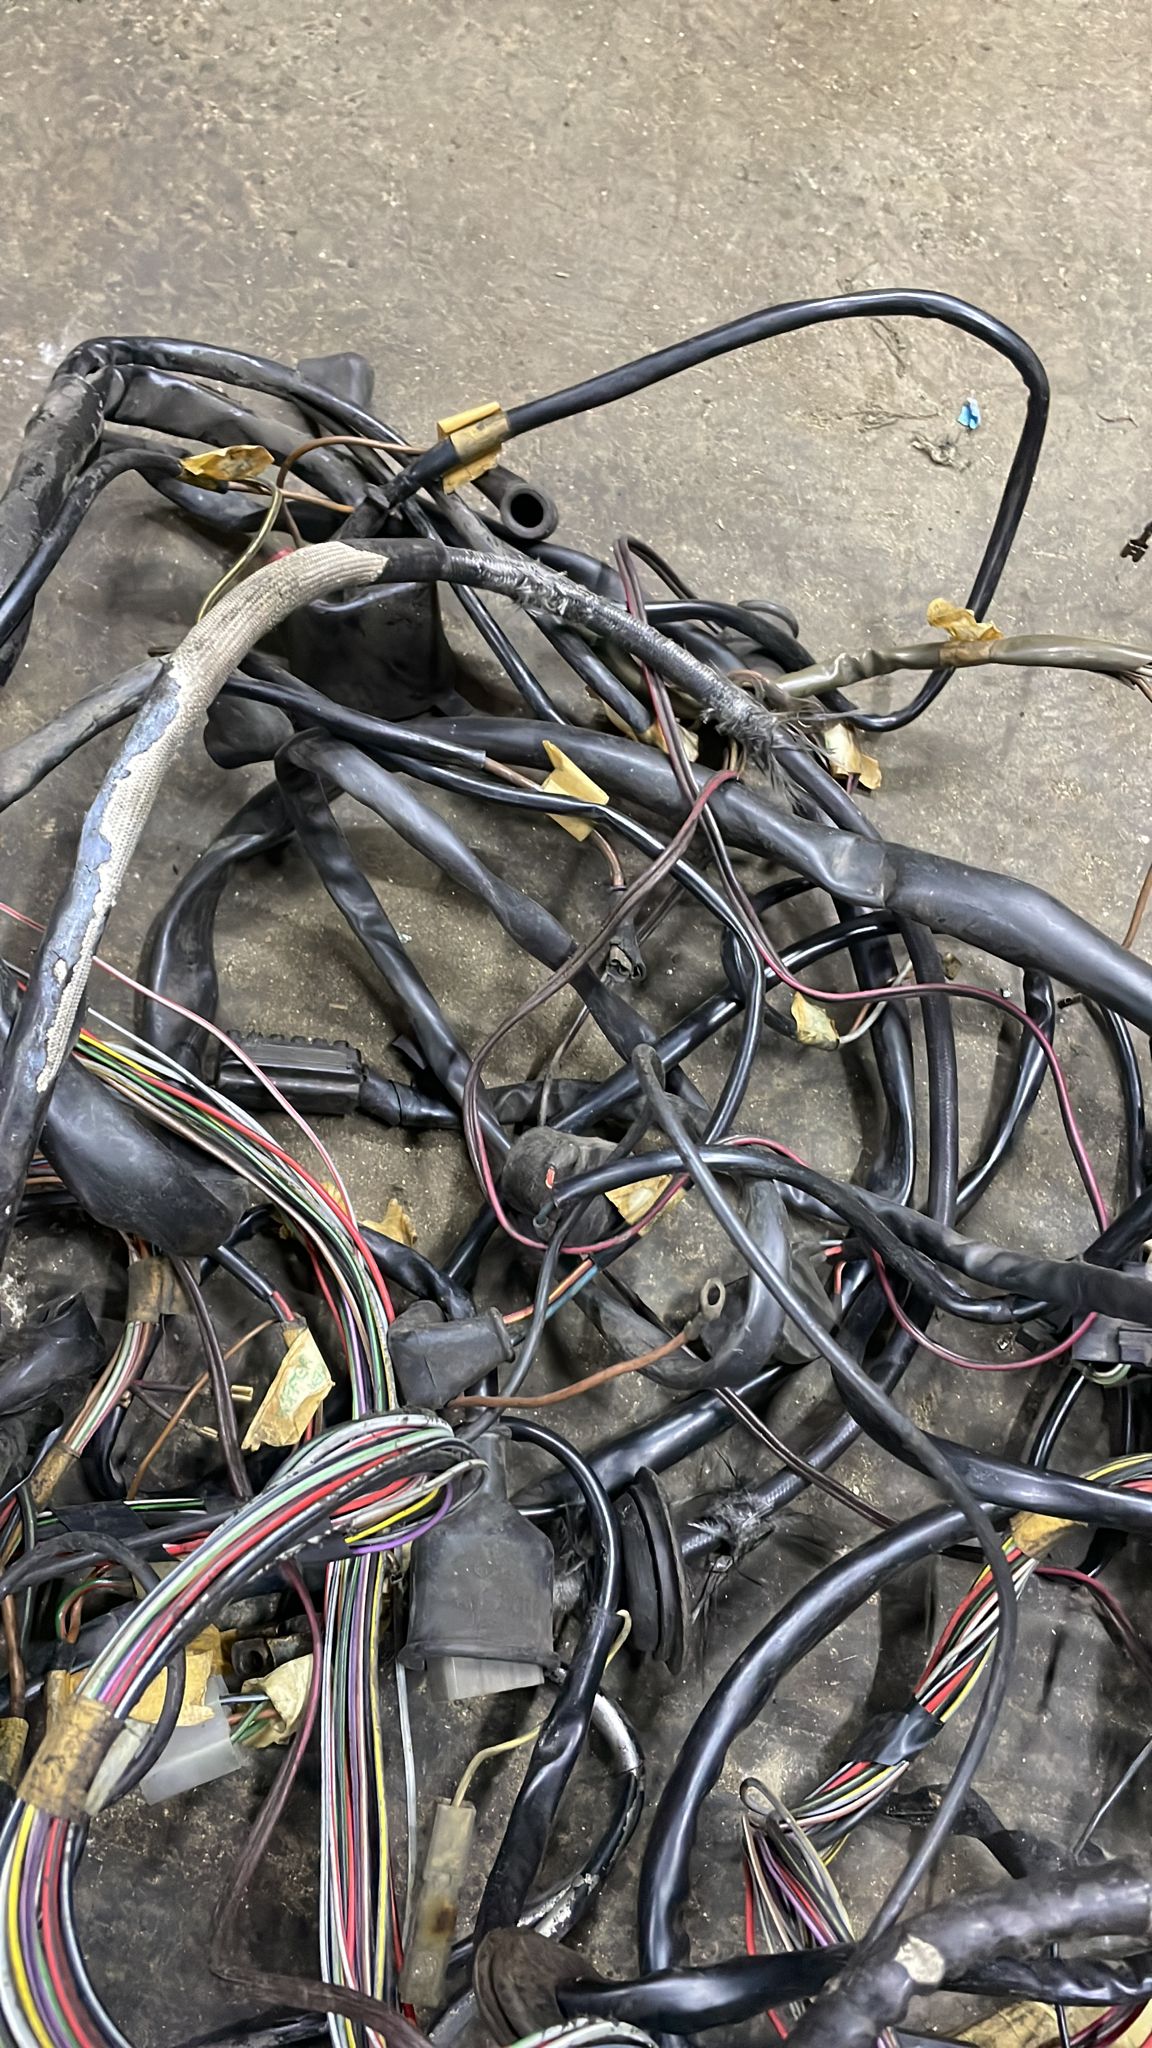 Porsche 924 Turbo complete wiring loom from LHD car includes engine bay, used 105